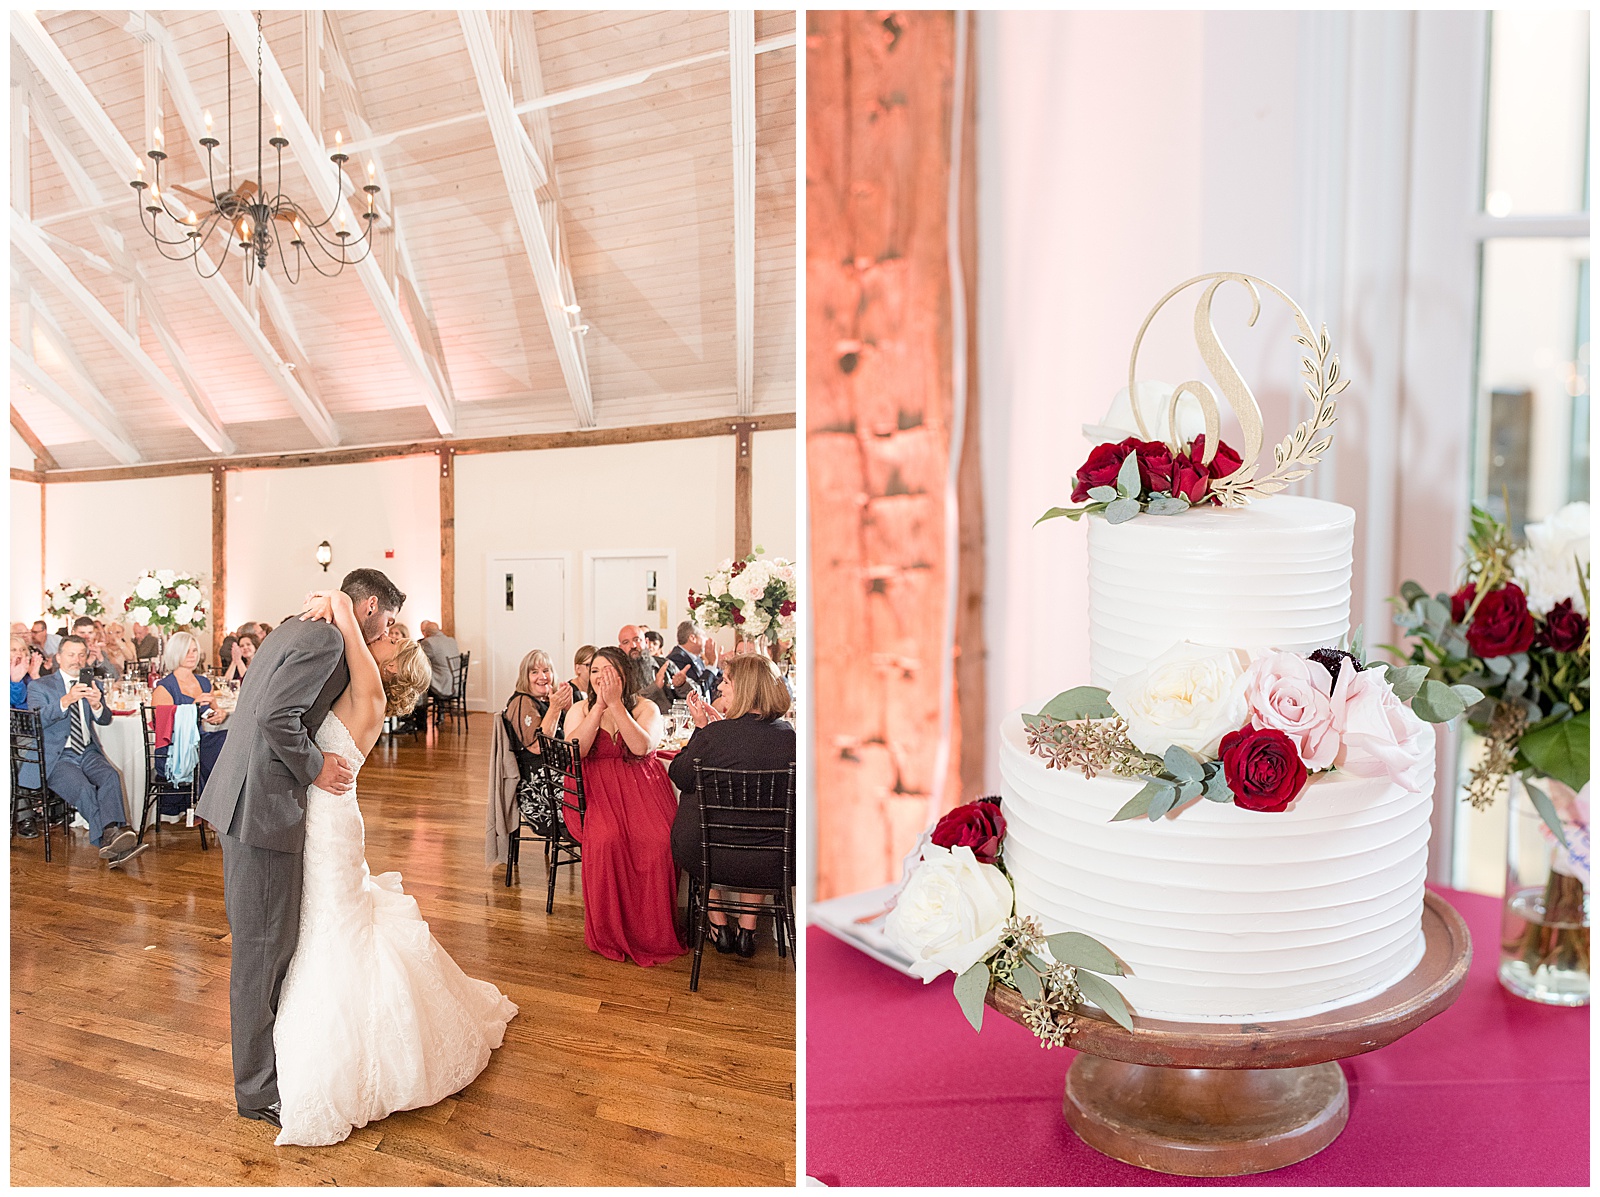 the groom is dipping the bride back while on the dance floor of the reception and the groom is on the left and the bride is on the right arching backwards and the guests are watching with smiles and the couple has their arms around one another at Riverdale Manor in Lancaster, PA, photo of the wedding cake displayed on a maroon table cloth with dark red and white flower accents on the cake and beautiful cake topper at Riverdale Manor in Lancaster, PA